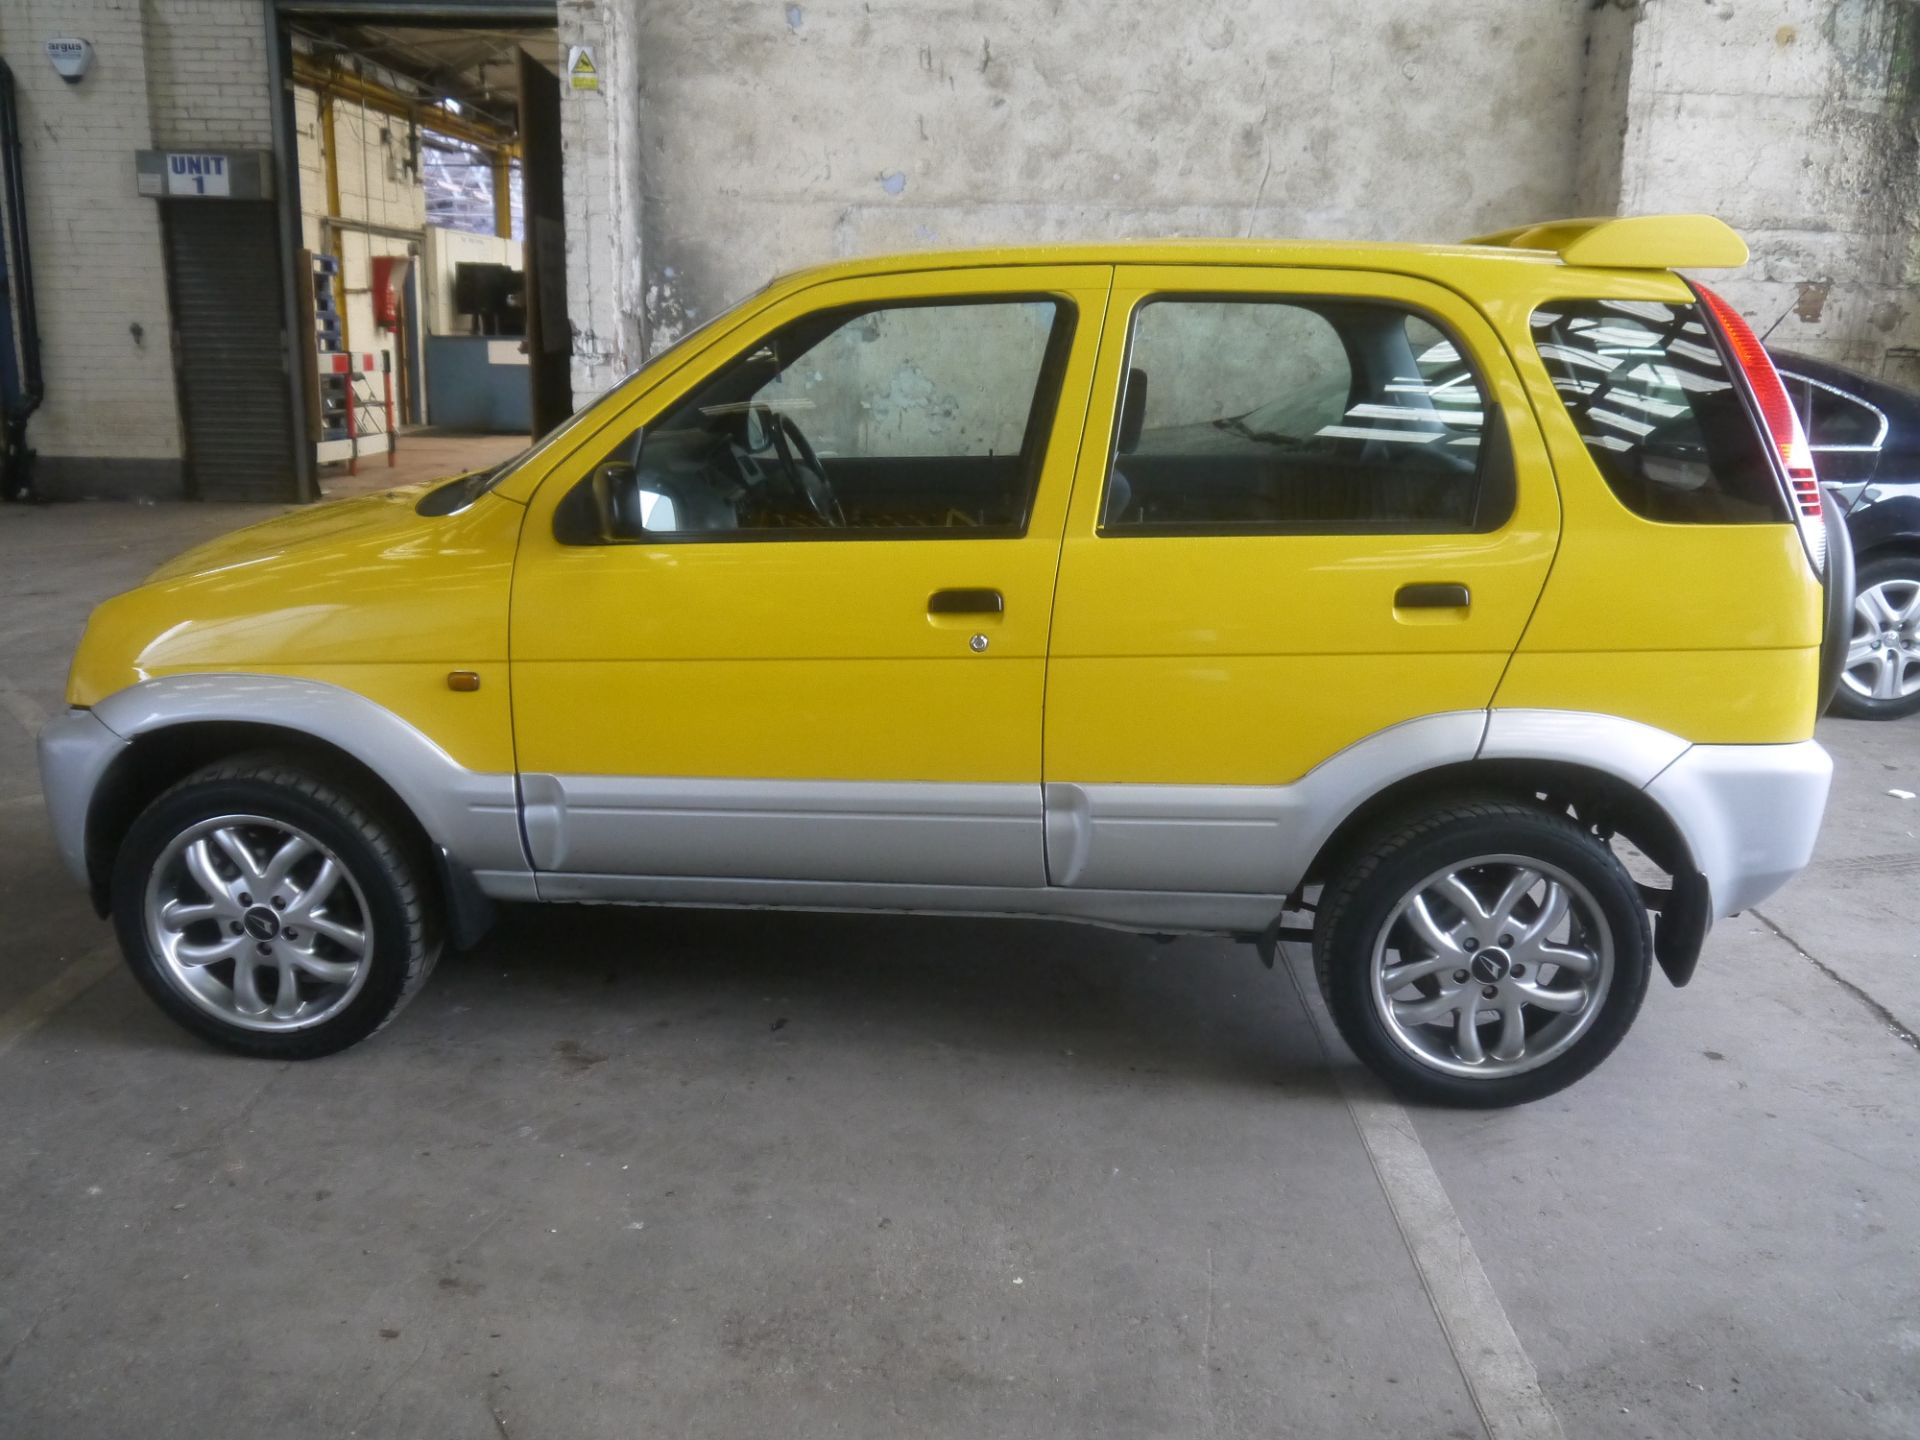 55 plate Daihatsu Terios Sport, 1.3ltr with a Automatic gearbox, 157,265 miles (unchecked), MOT - Image 3 of 10